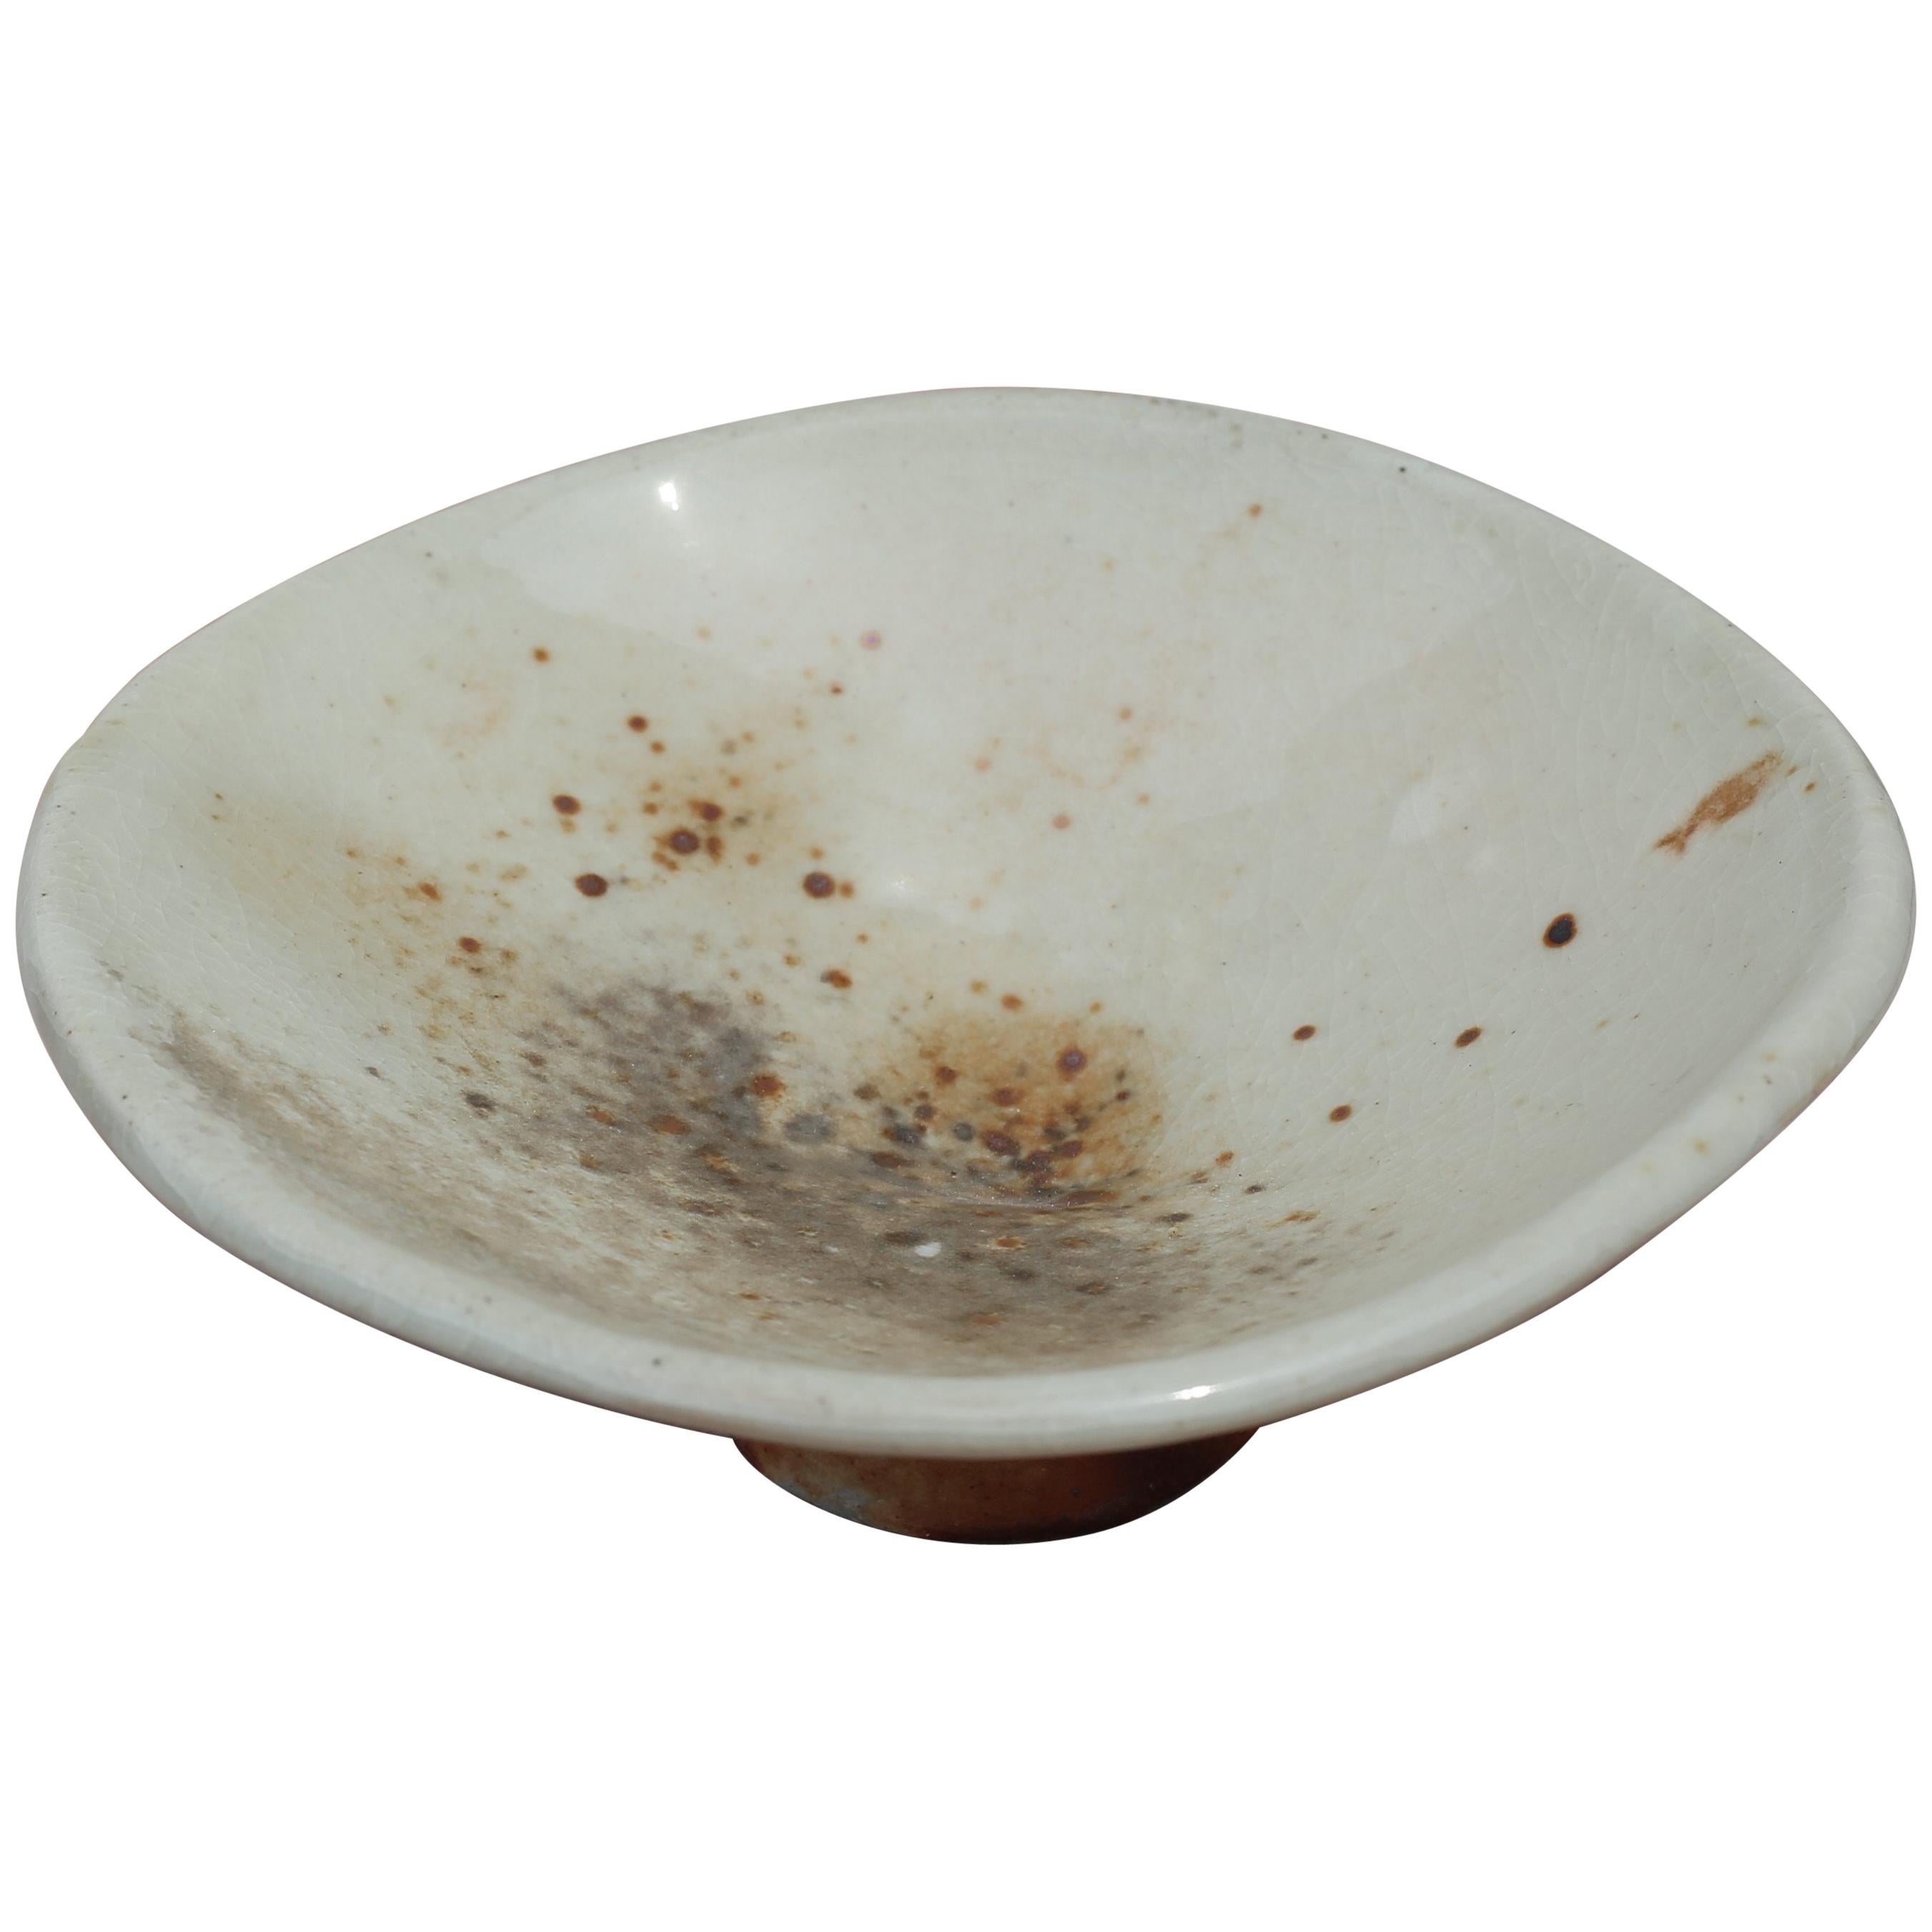 Decorative Pedestal Bowl, Hand-Built Wood-Fired Stoneware For Sale